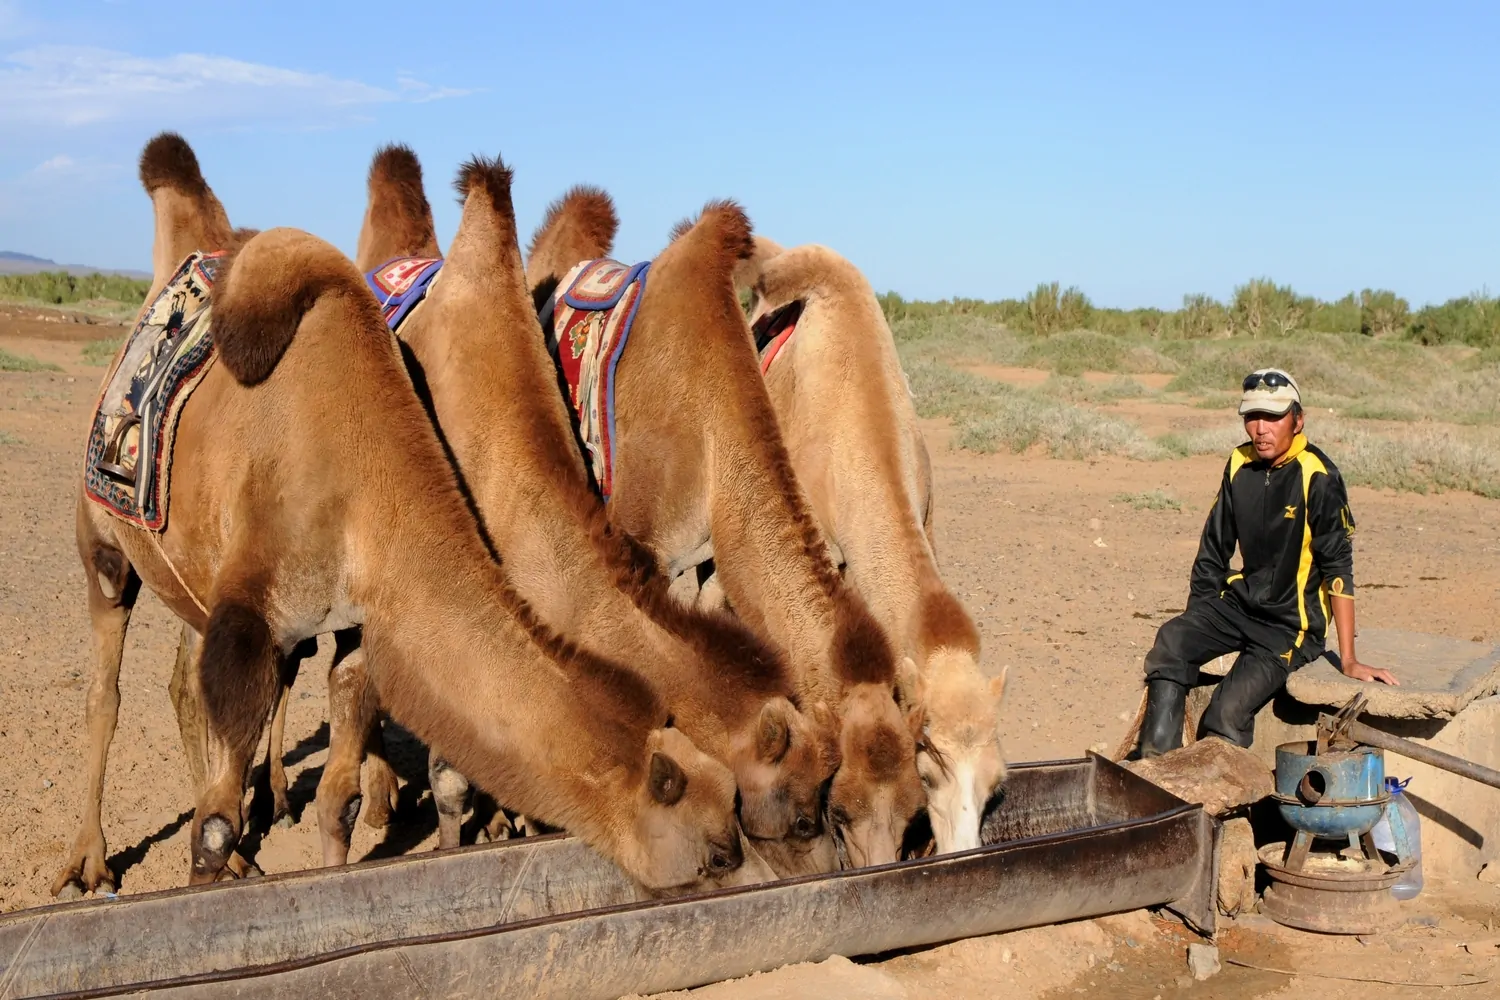 A camel breeder with his camels at Gobi desert Mongolia